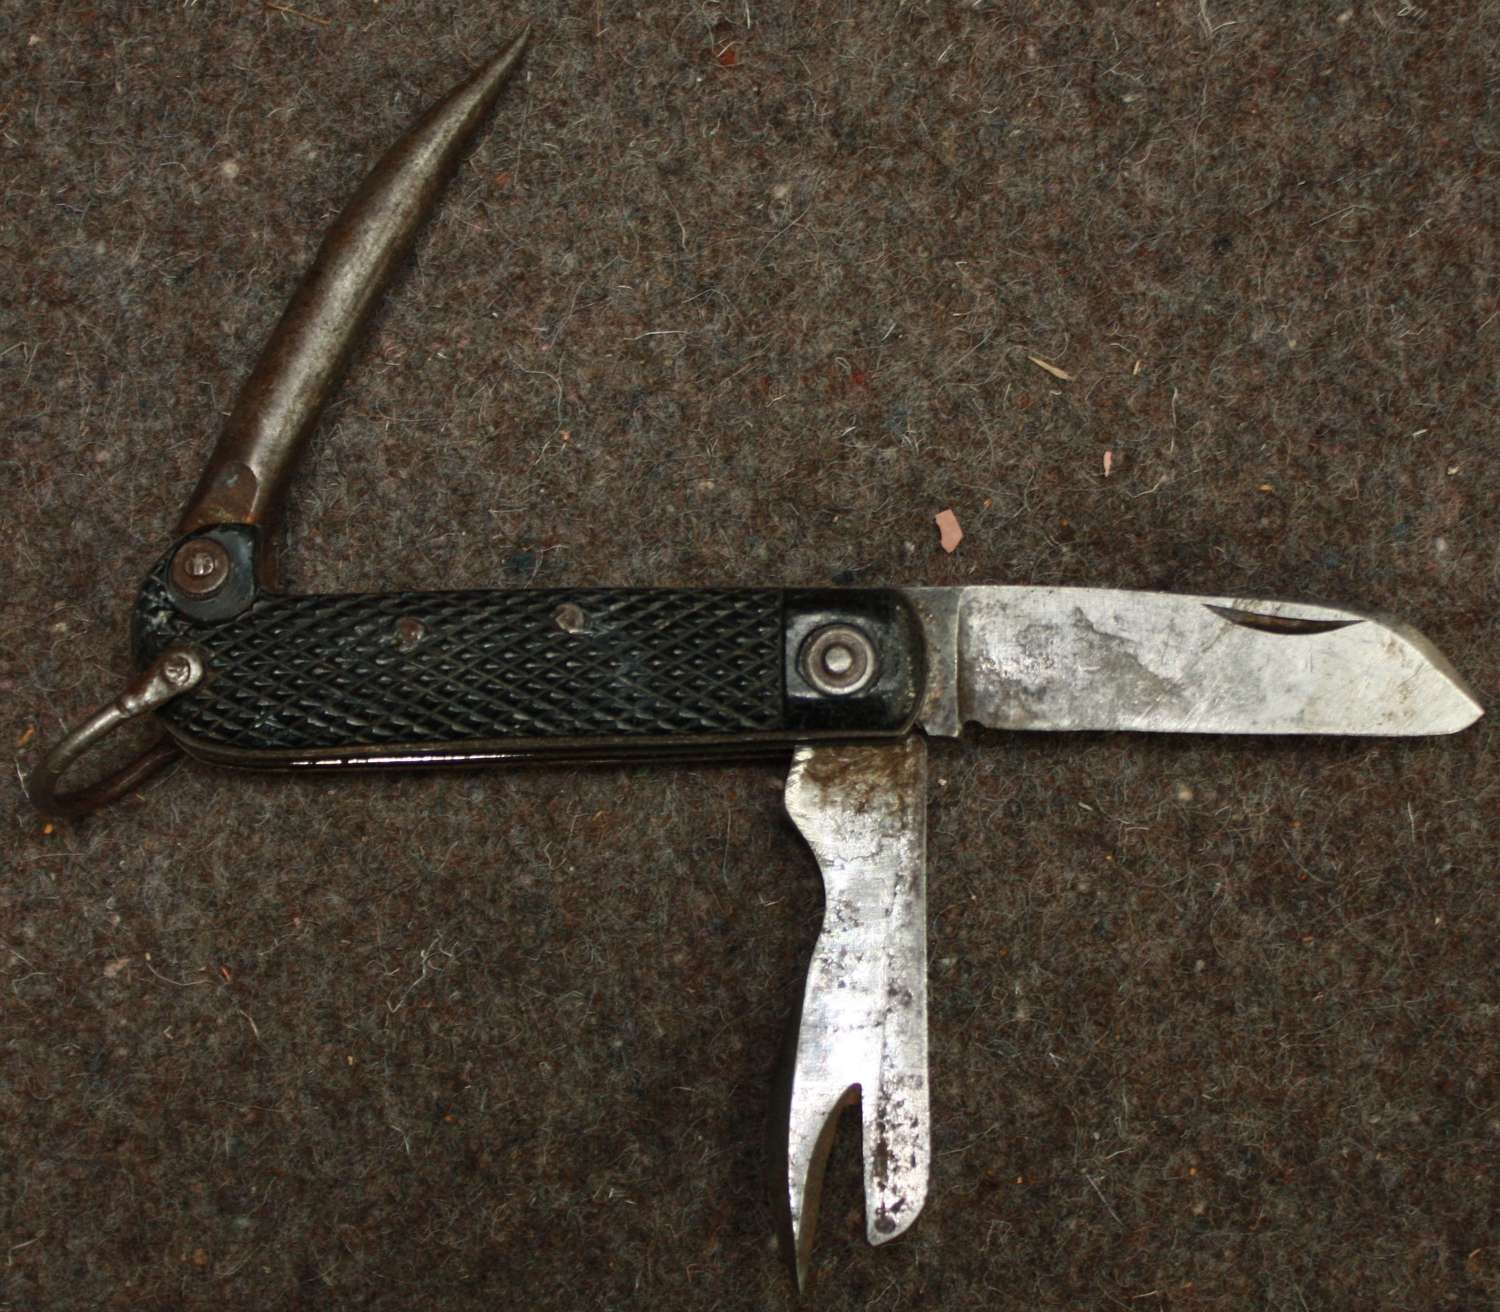 A GOOD USED EXAMPLE OF THE BRITISH ARMY CLASP KNIFE 1944 DATED